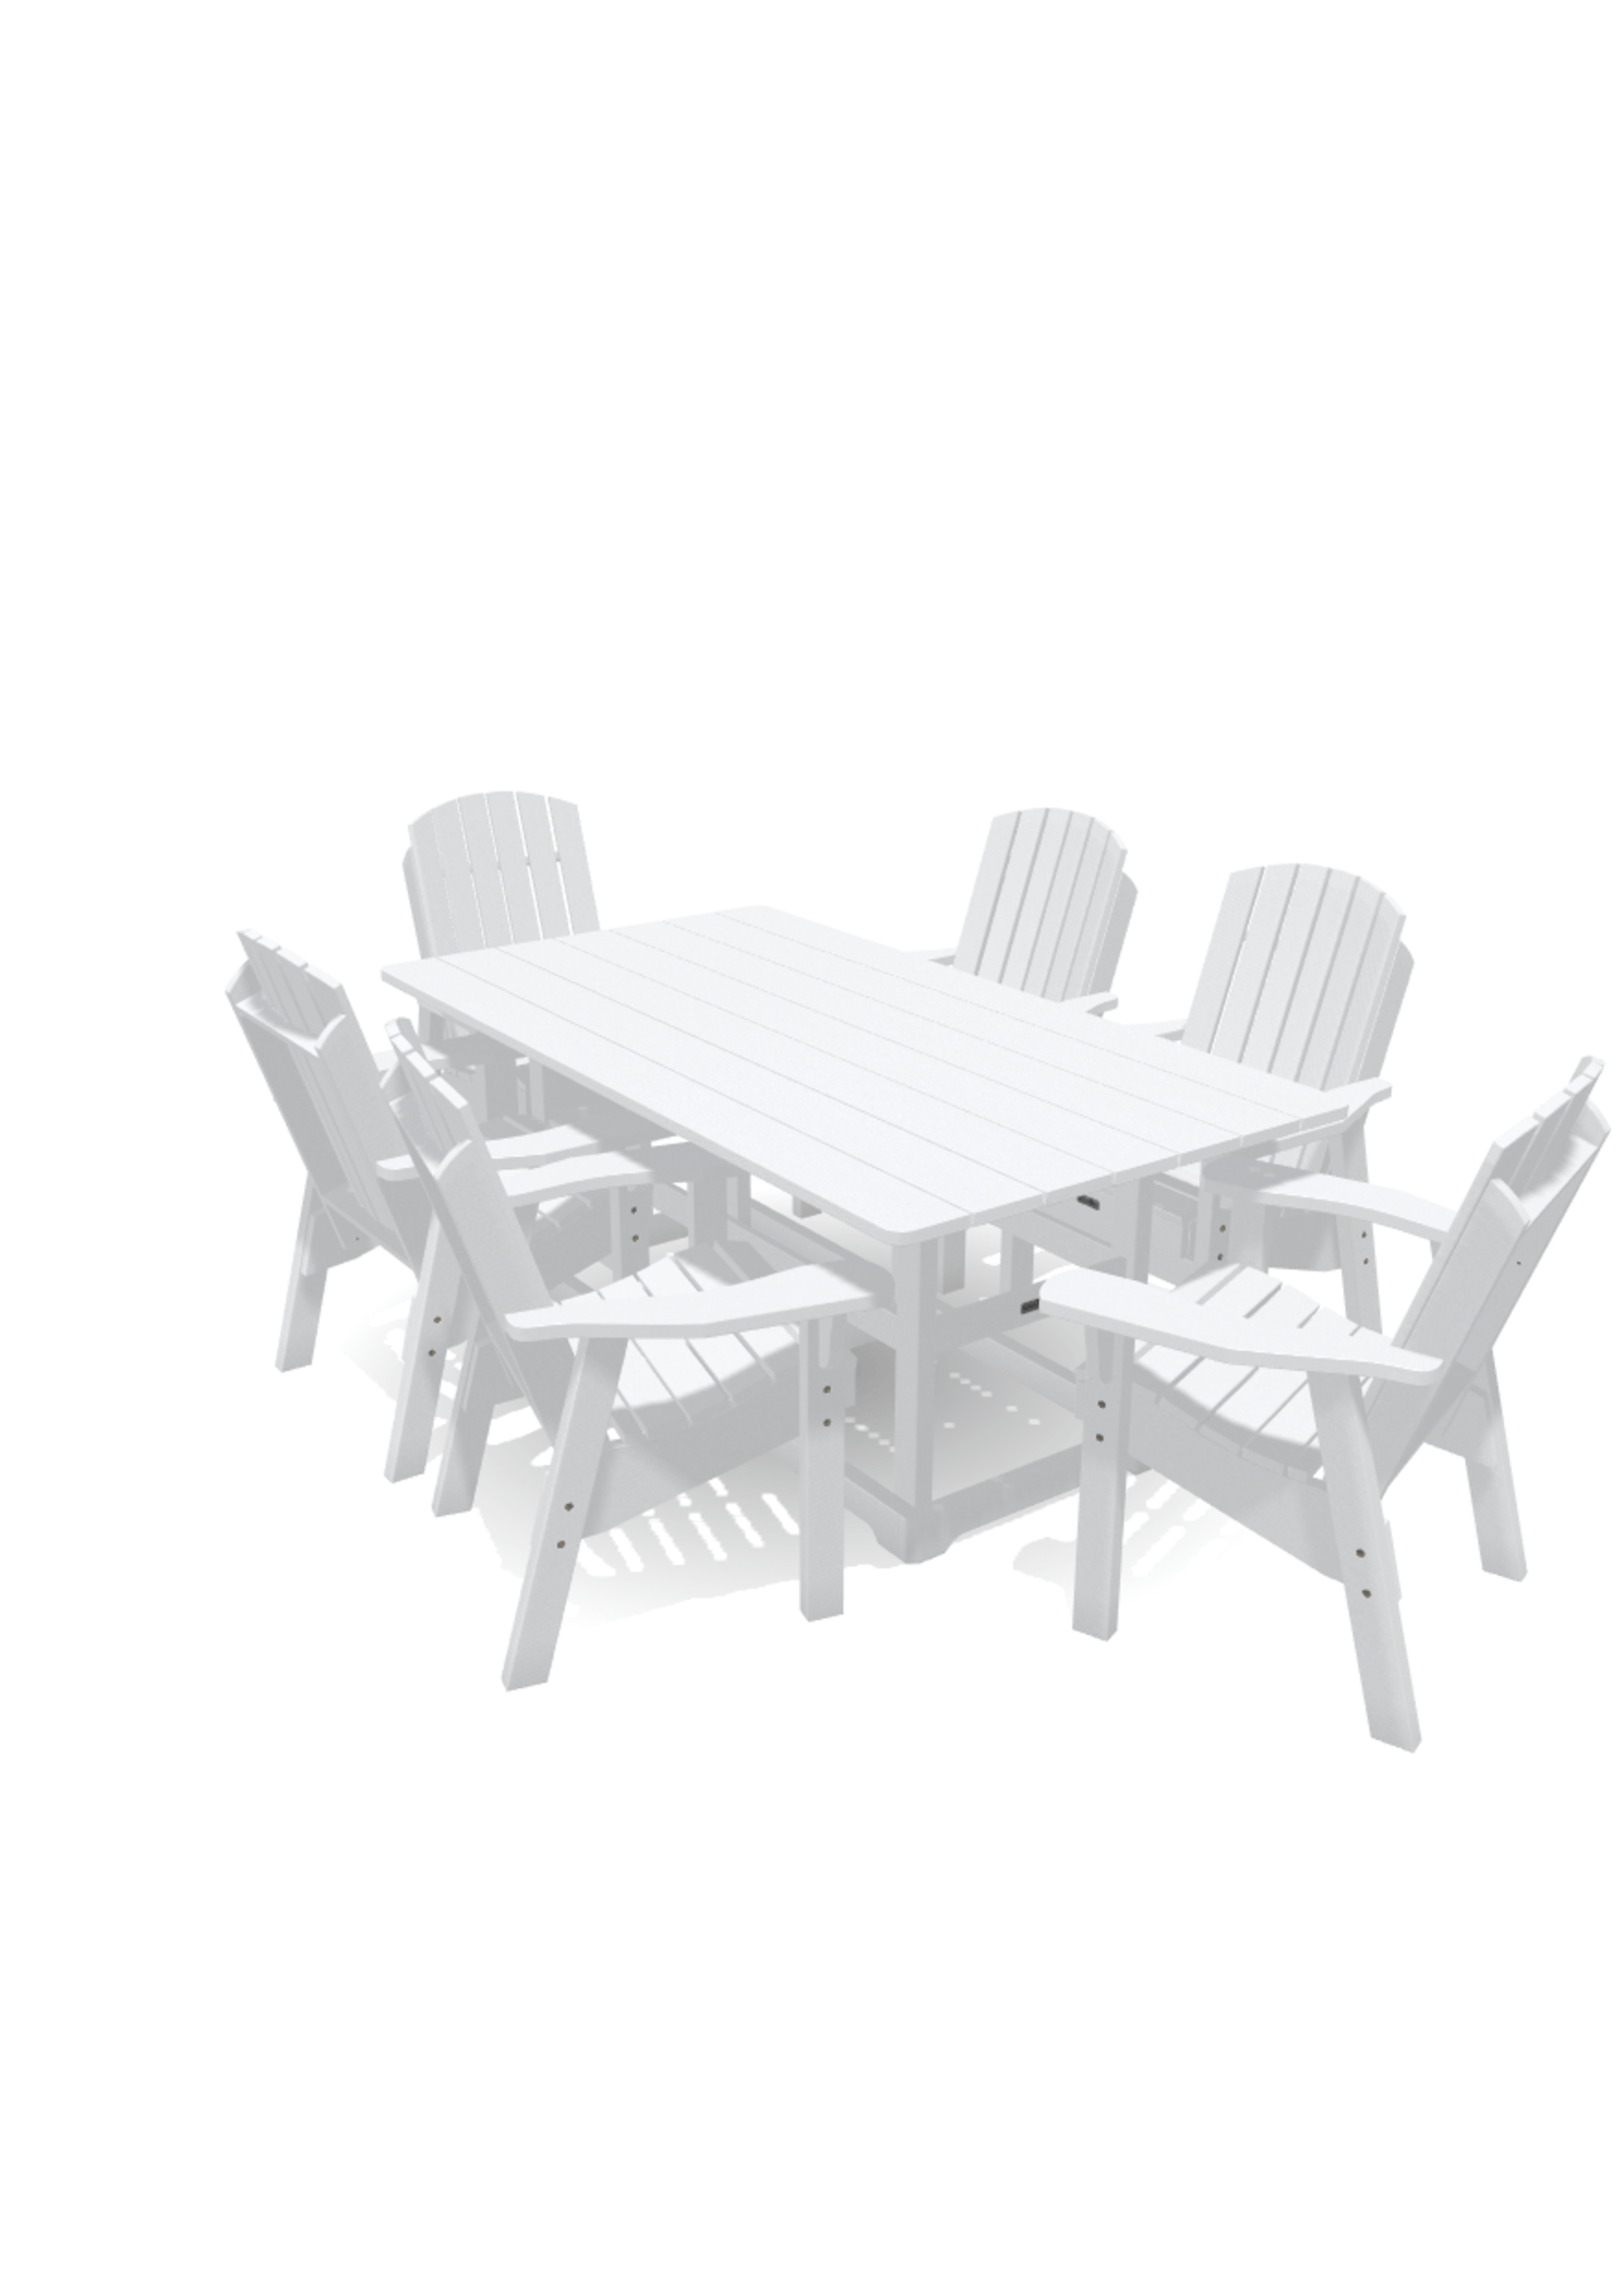 Krahn Dining Deluxe 6' Table w/6 Arm Chairs